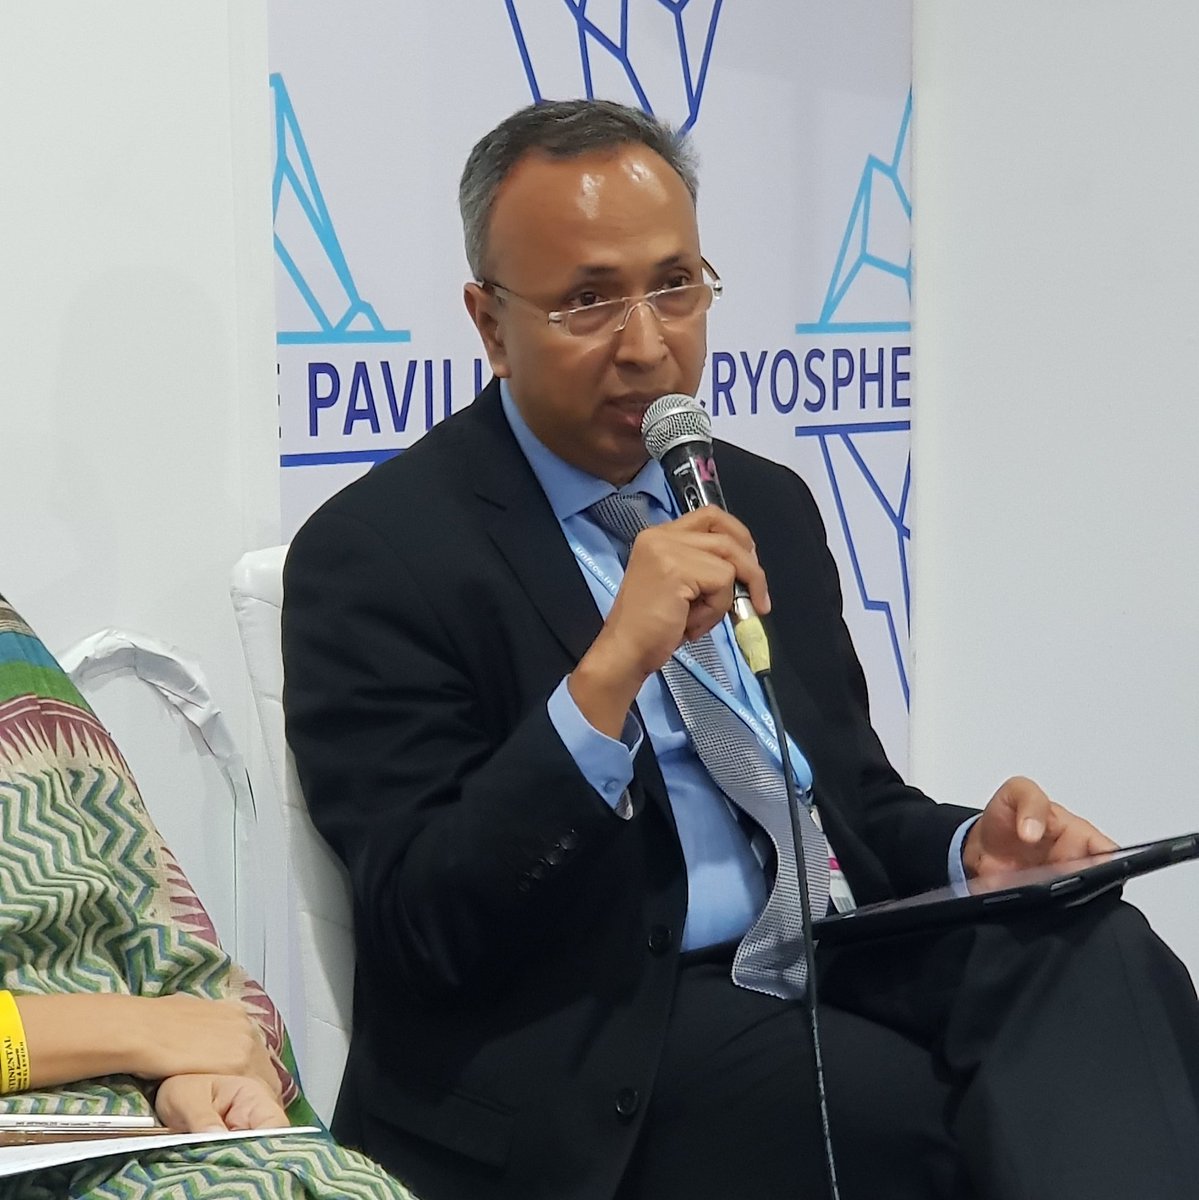 Excellent presentation by panelists of #irbm session in #COP27 #cryospherepavilion organised by @icimod @WaterPartnersAU . This will help enhance the #IGB basin reports.